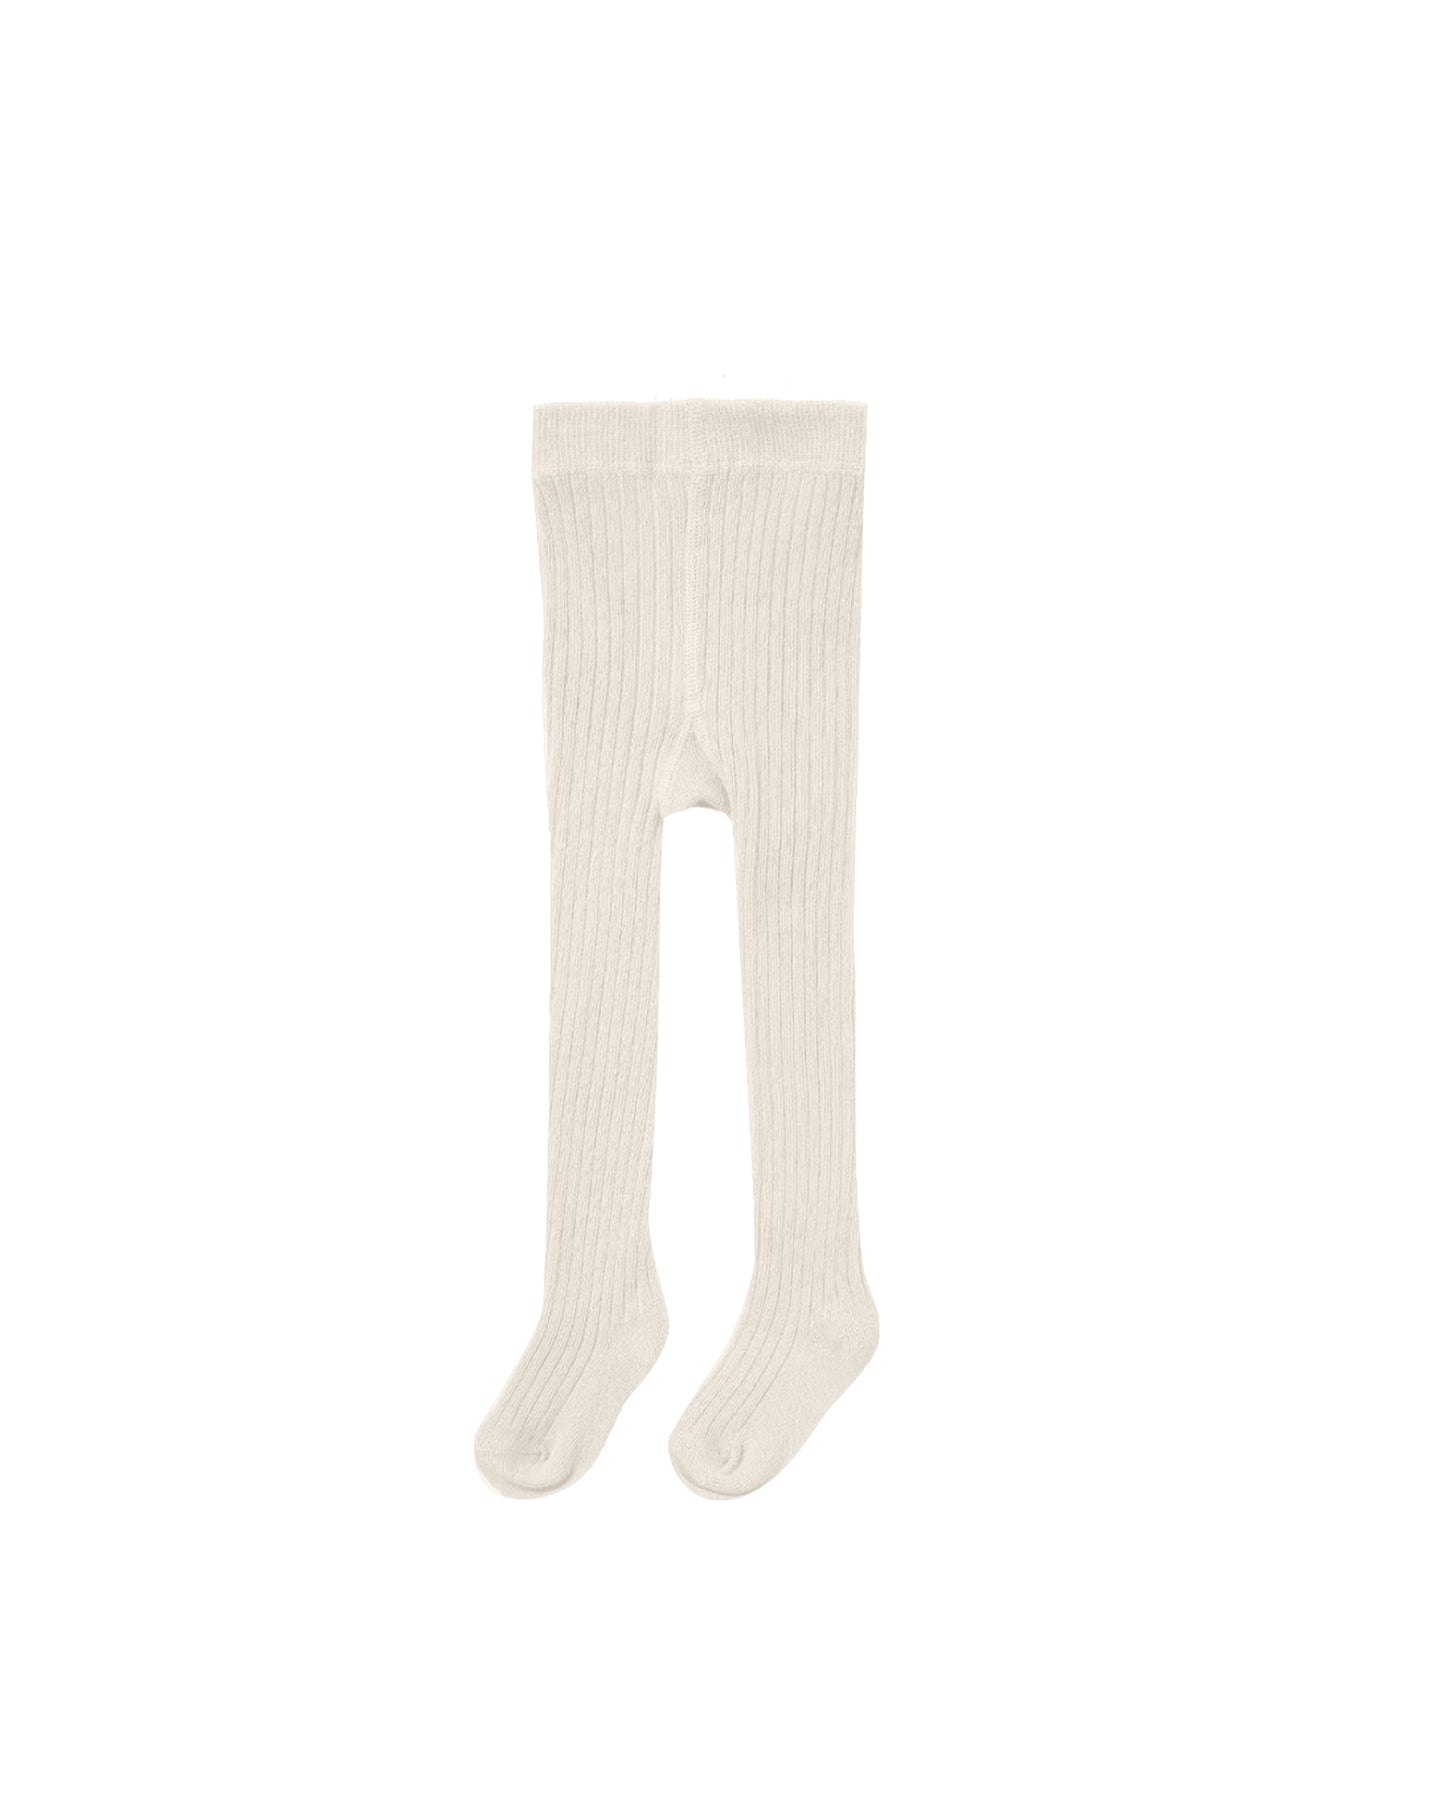 SALE - Quincy Mae Solid Ribbed Tights - Multiple Colors Available